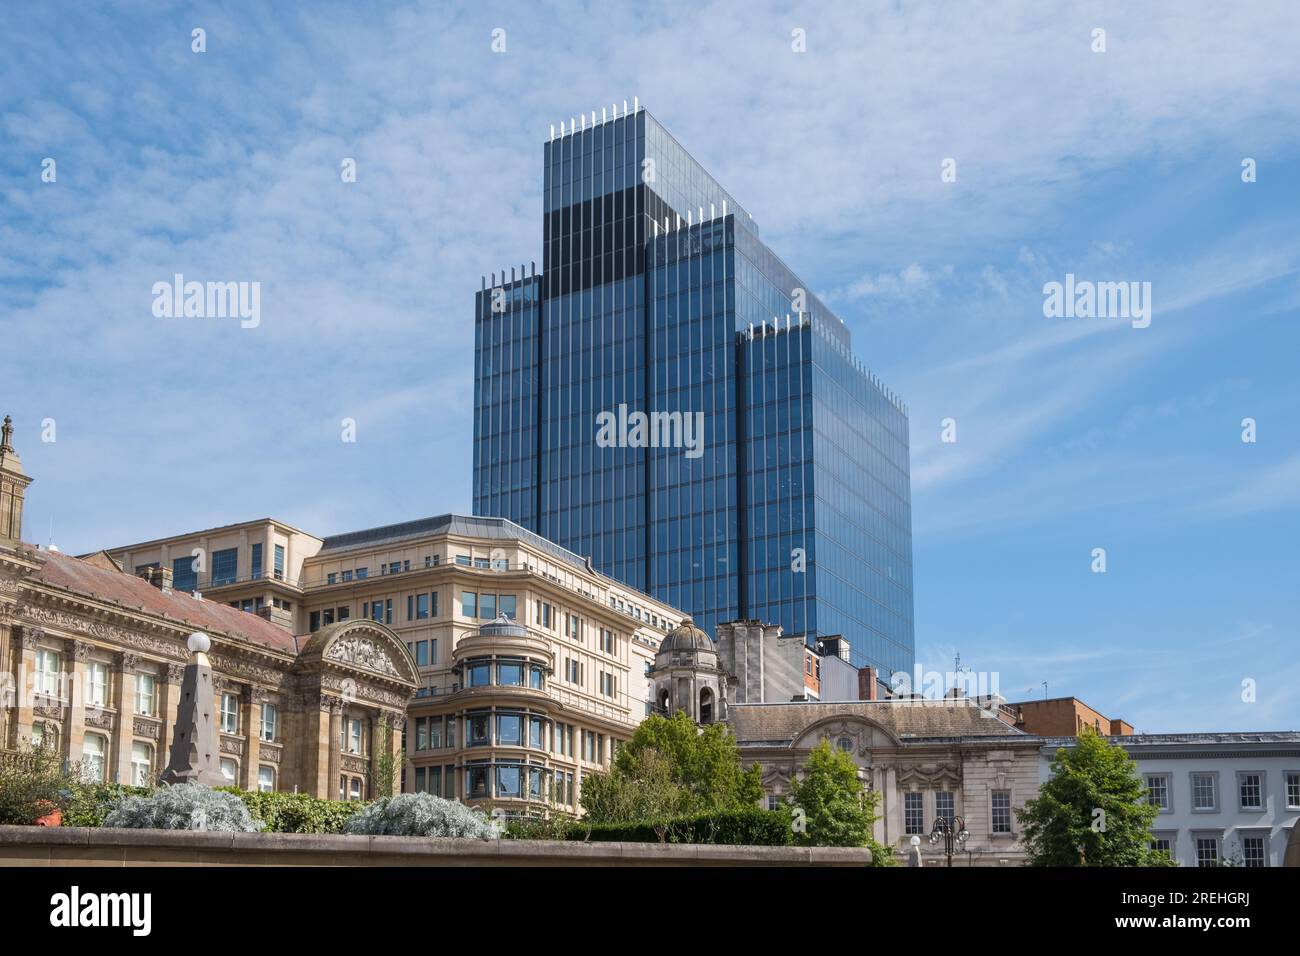 Birmingham City Council House with 103 Colmore Row in the background viewed from Victoria Square, Birmingham Stock Photo